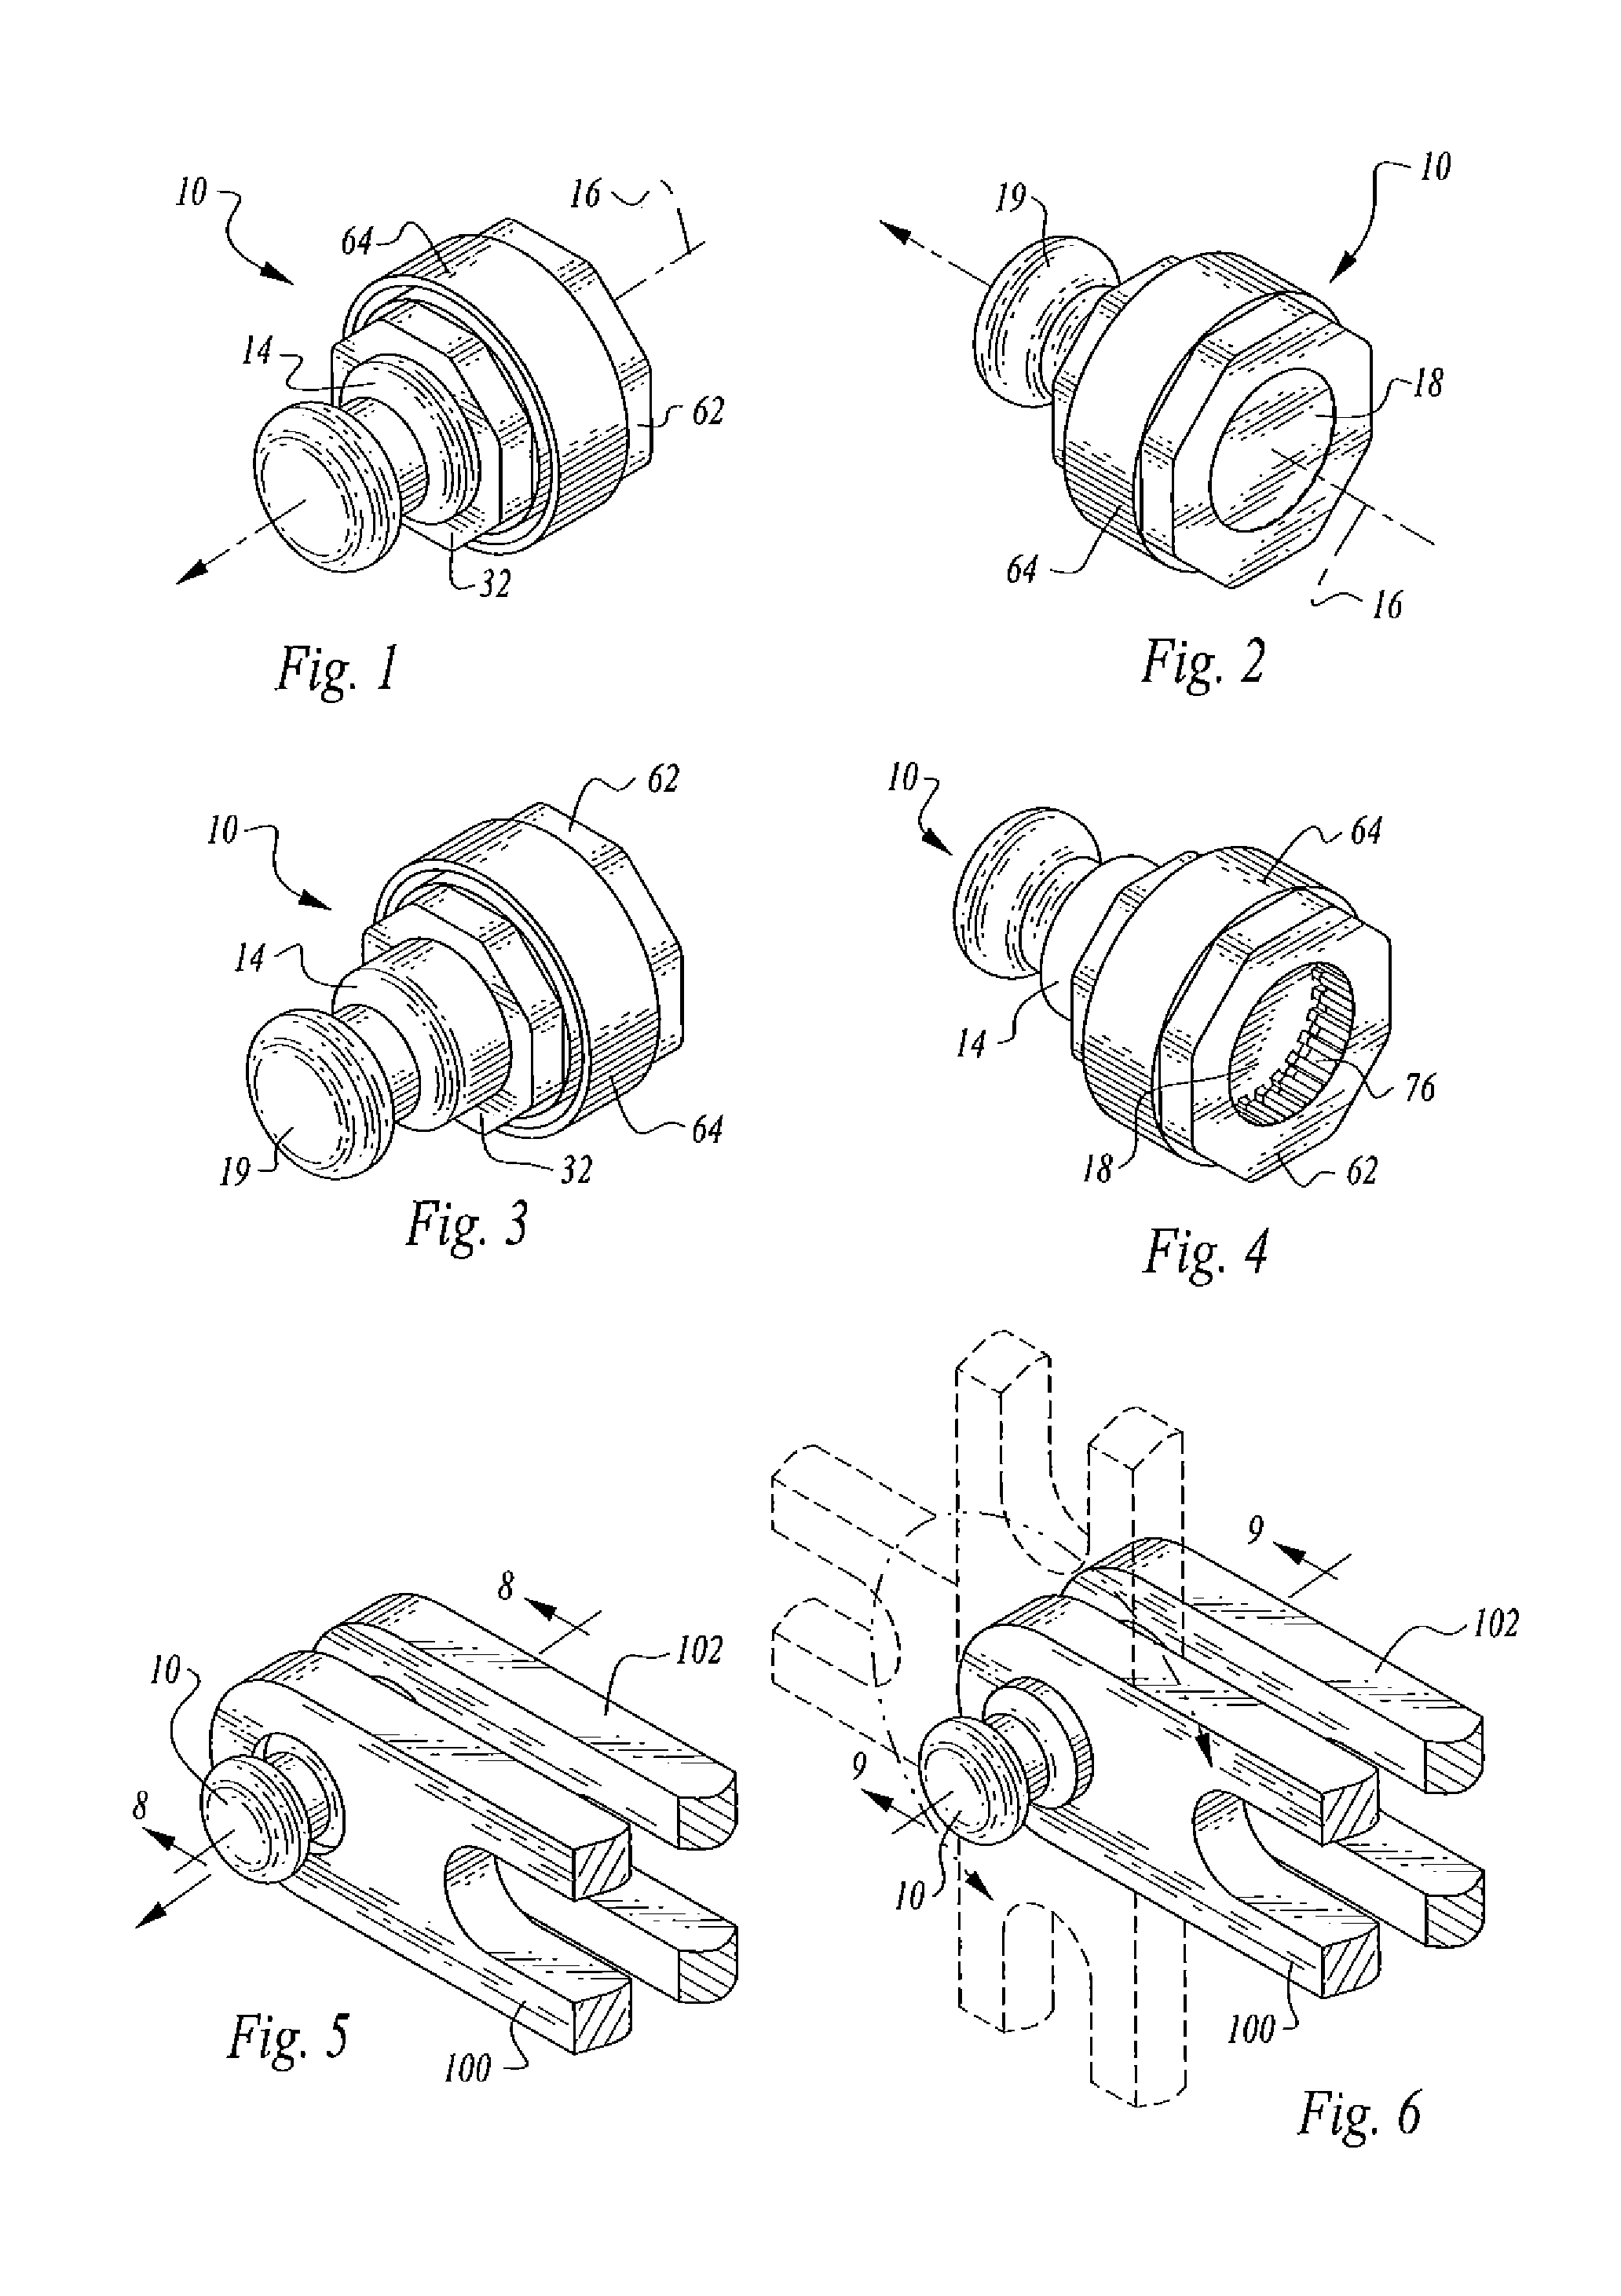 Pull-button, locking hinge assembly